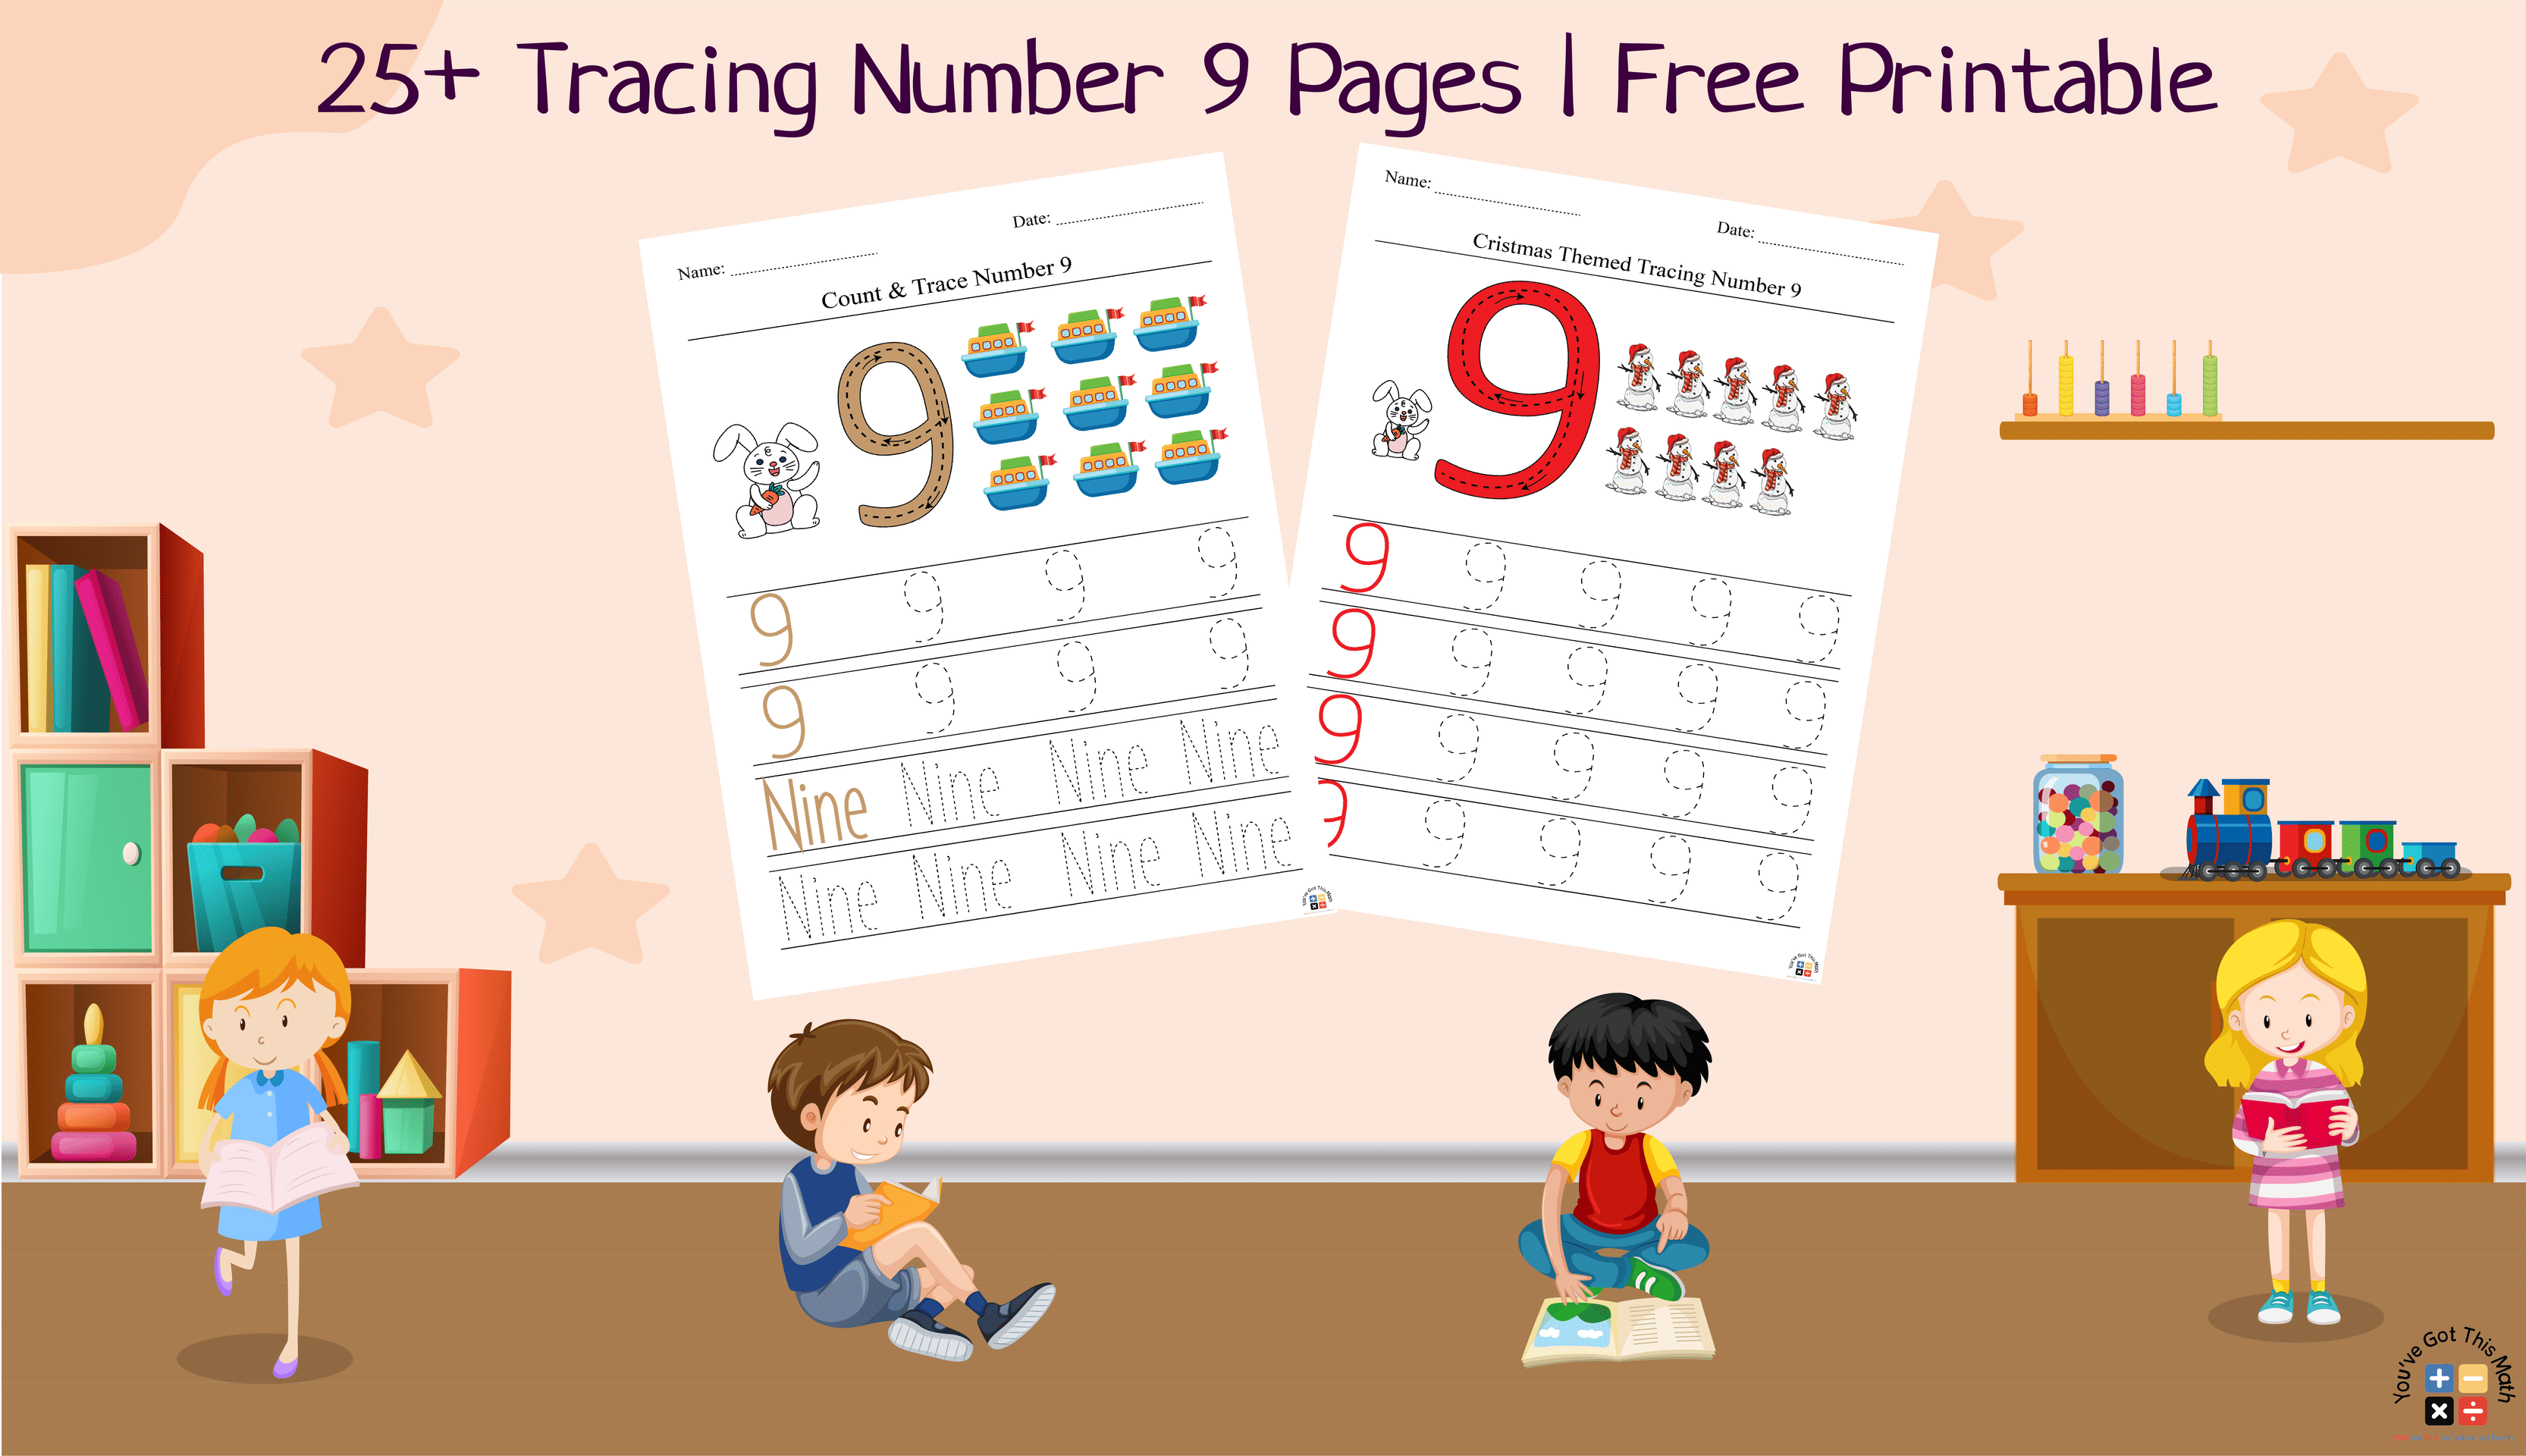 25+ Tracing Number 9 Pages | Free Printable